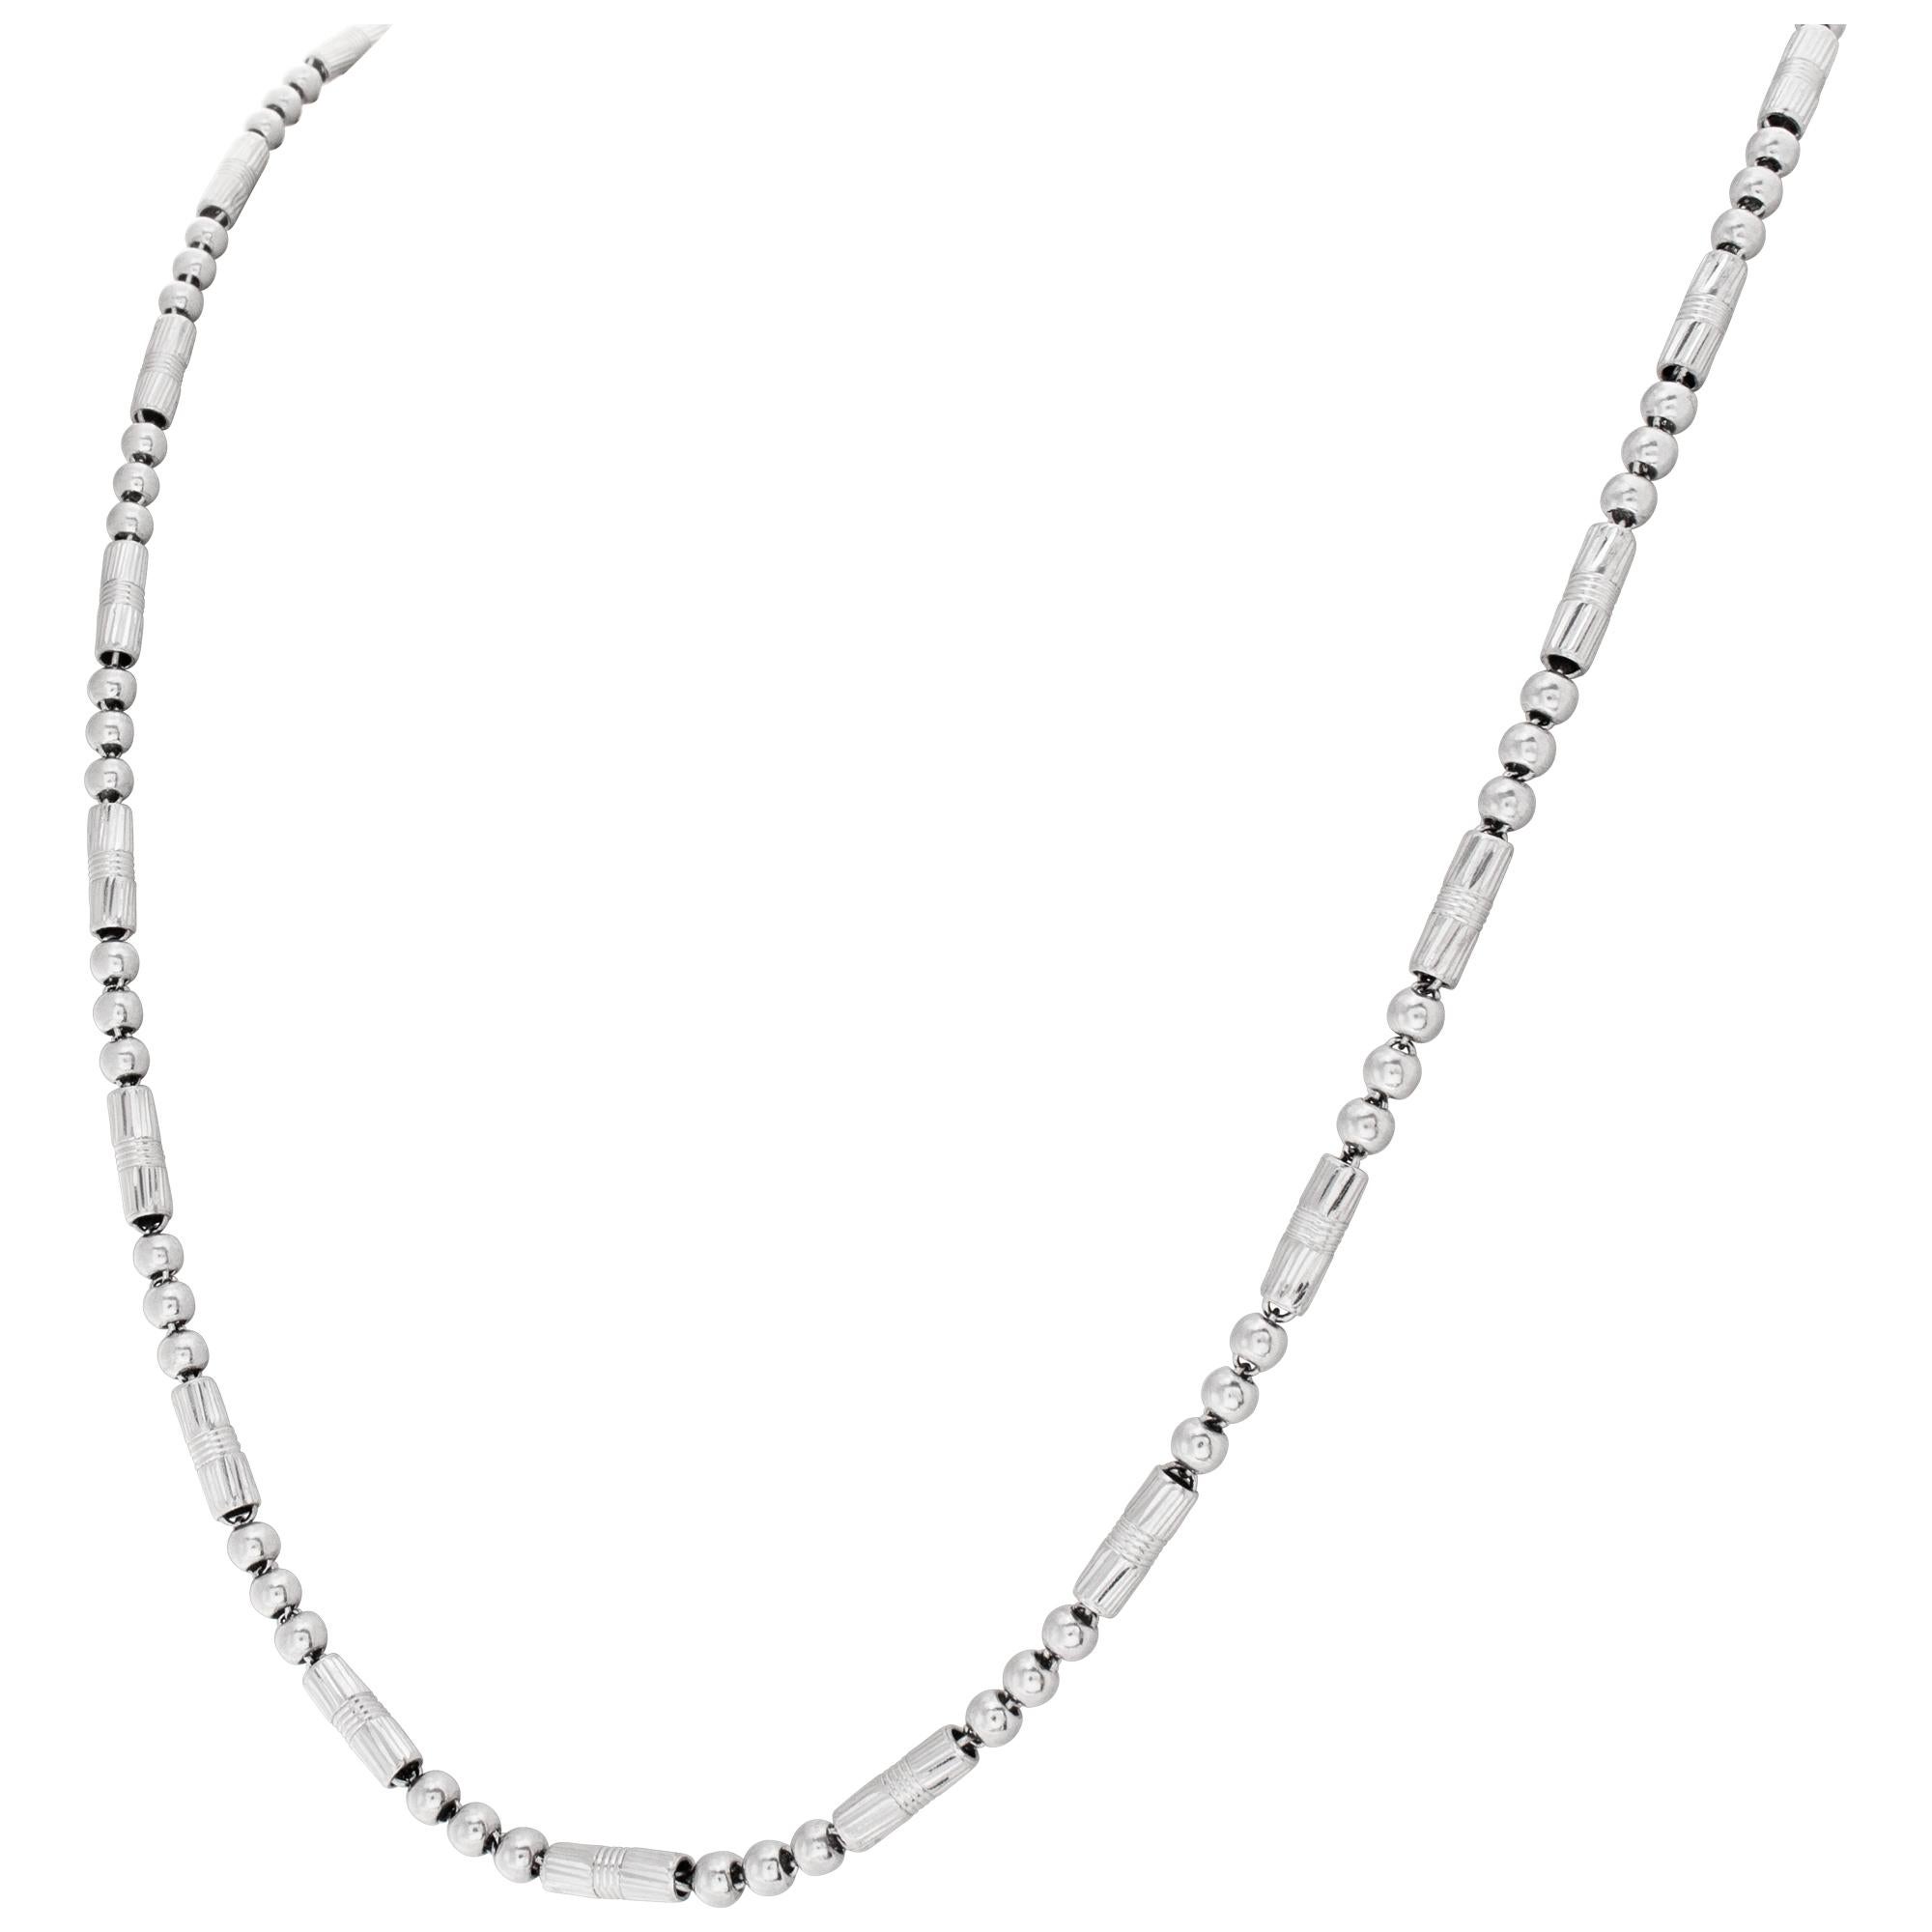 Exclusive chain necklace in platinum- 24inches. Width 4mm.
